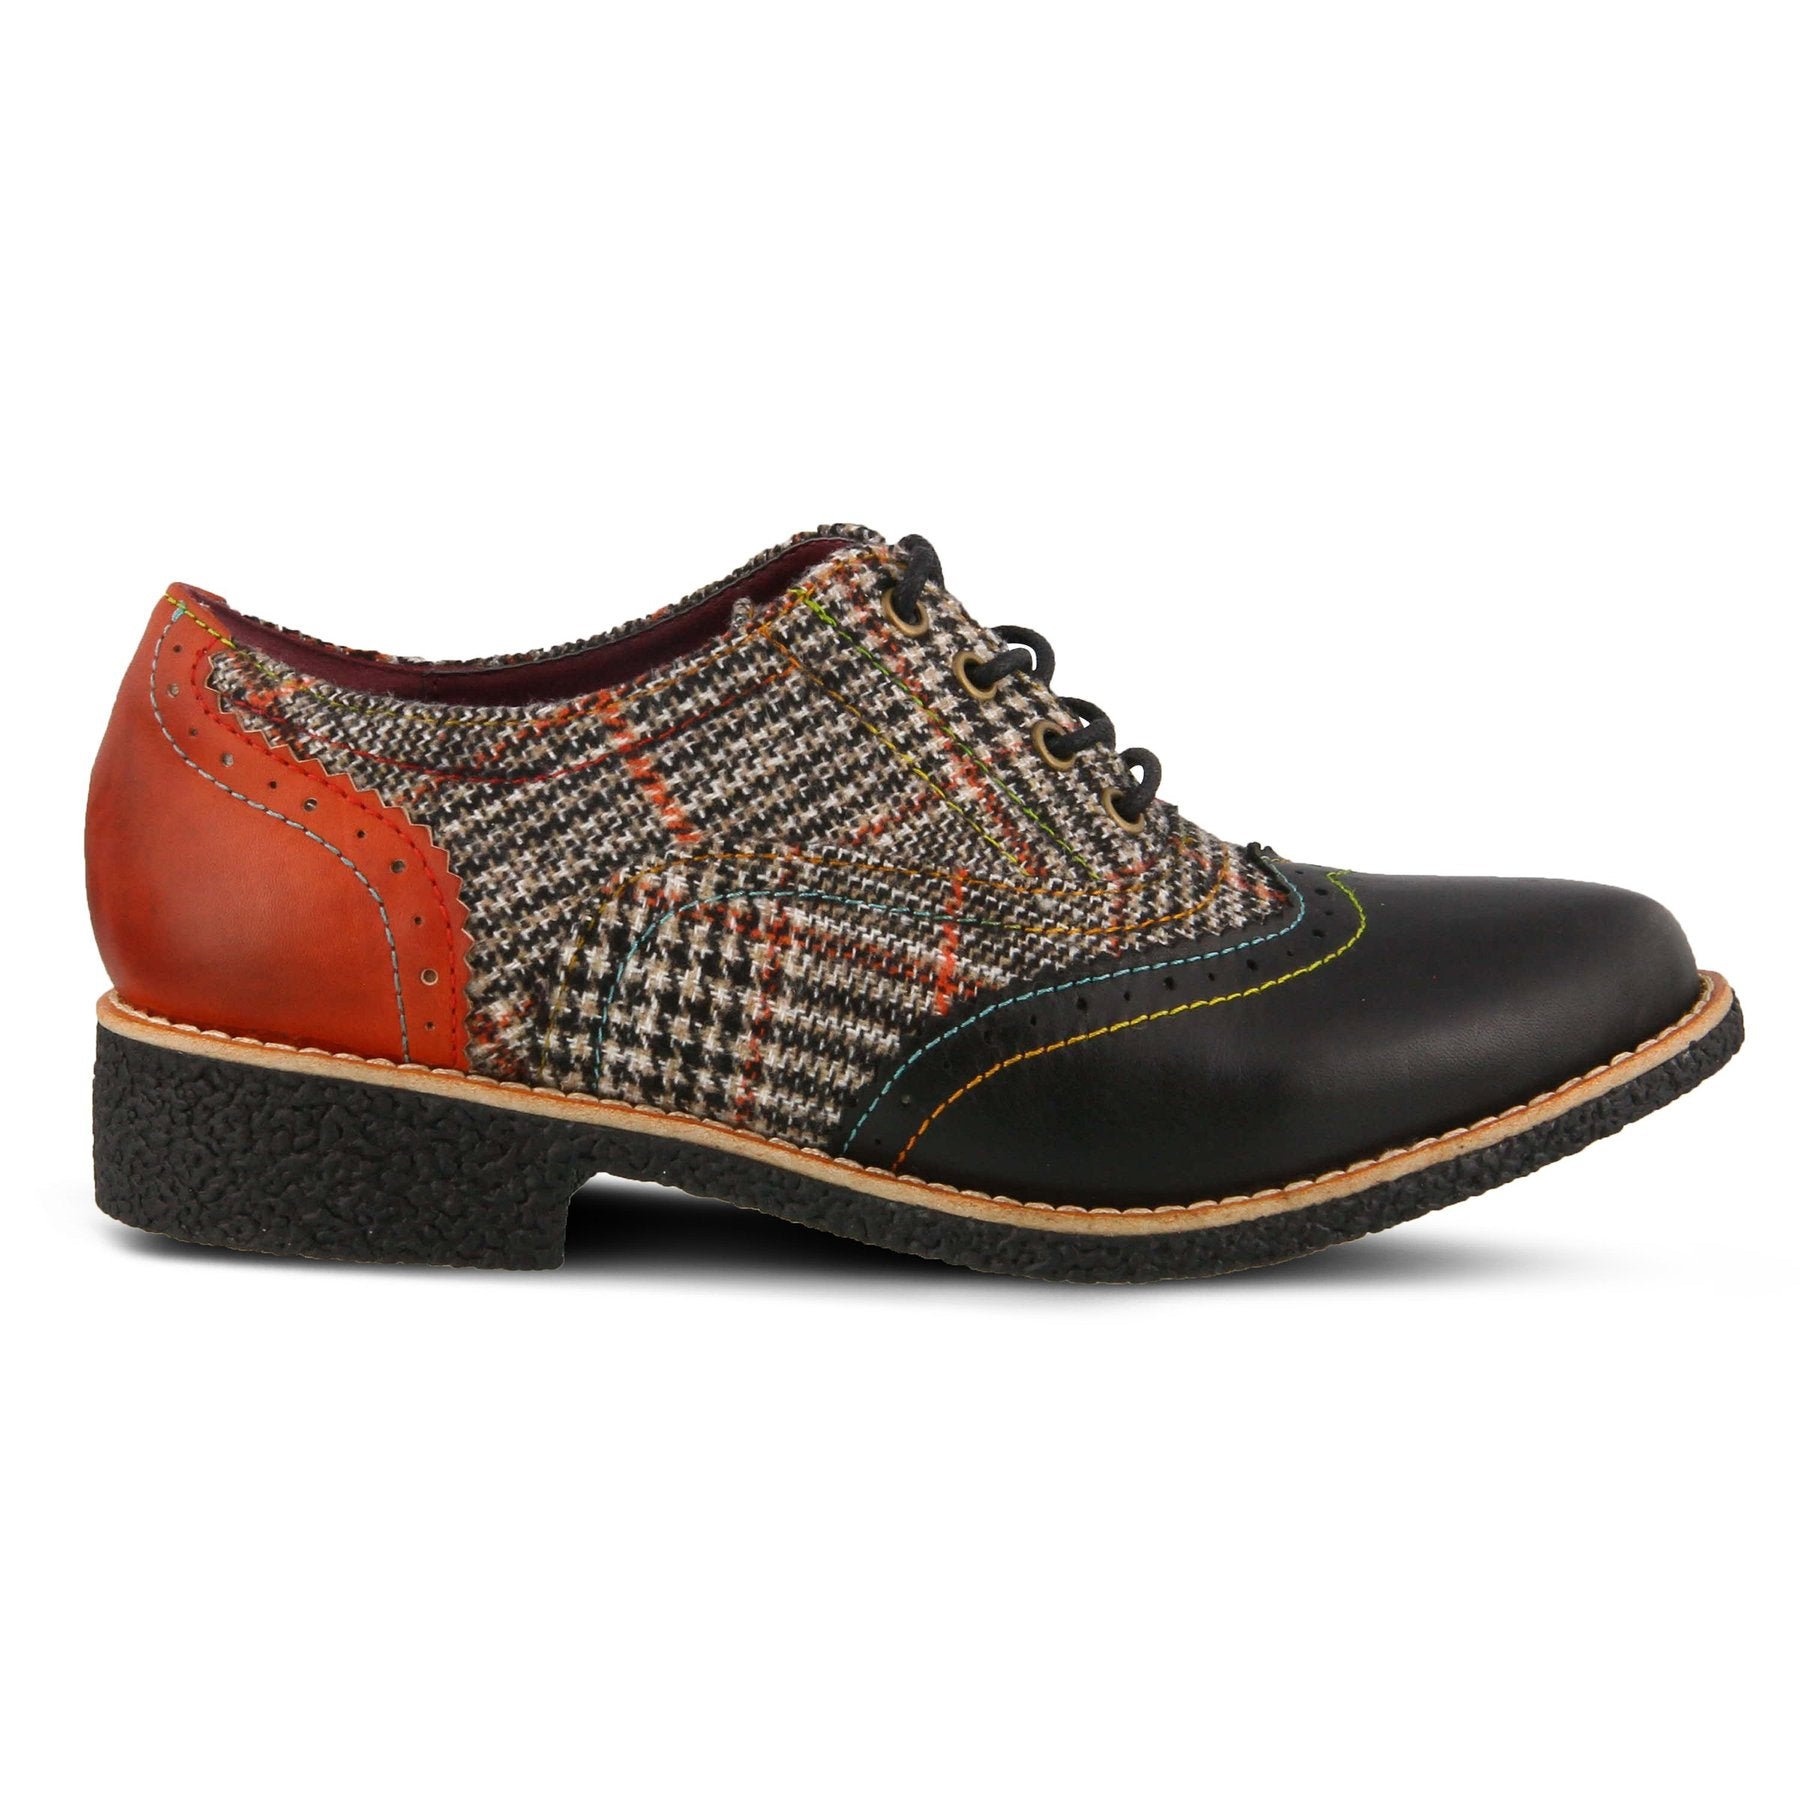 Outer side view of the l'artiste muggiasti shoe. This oxford shoe has a lace up front, red leather on the heel, black leather over the toes, and a mix of red and black plaid fabric in between.